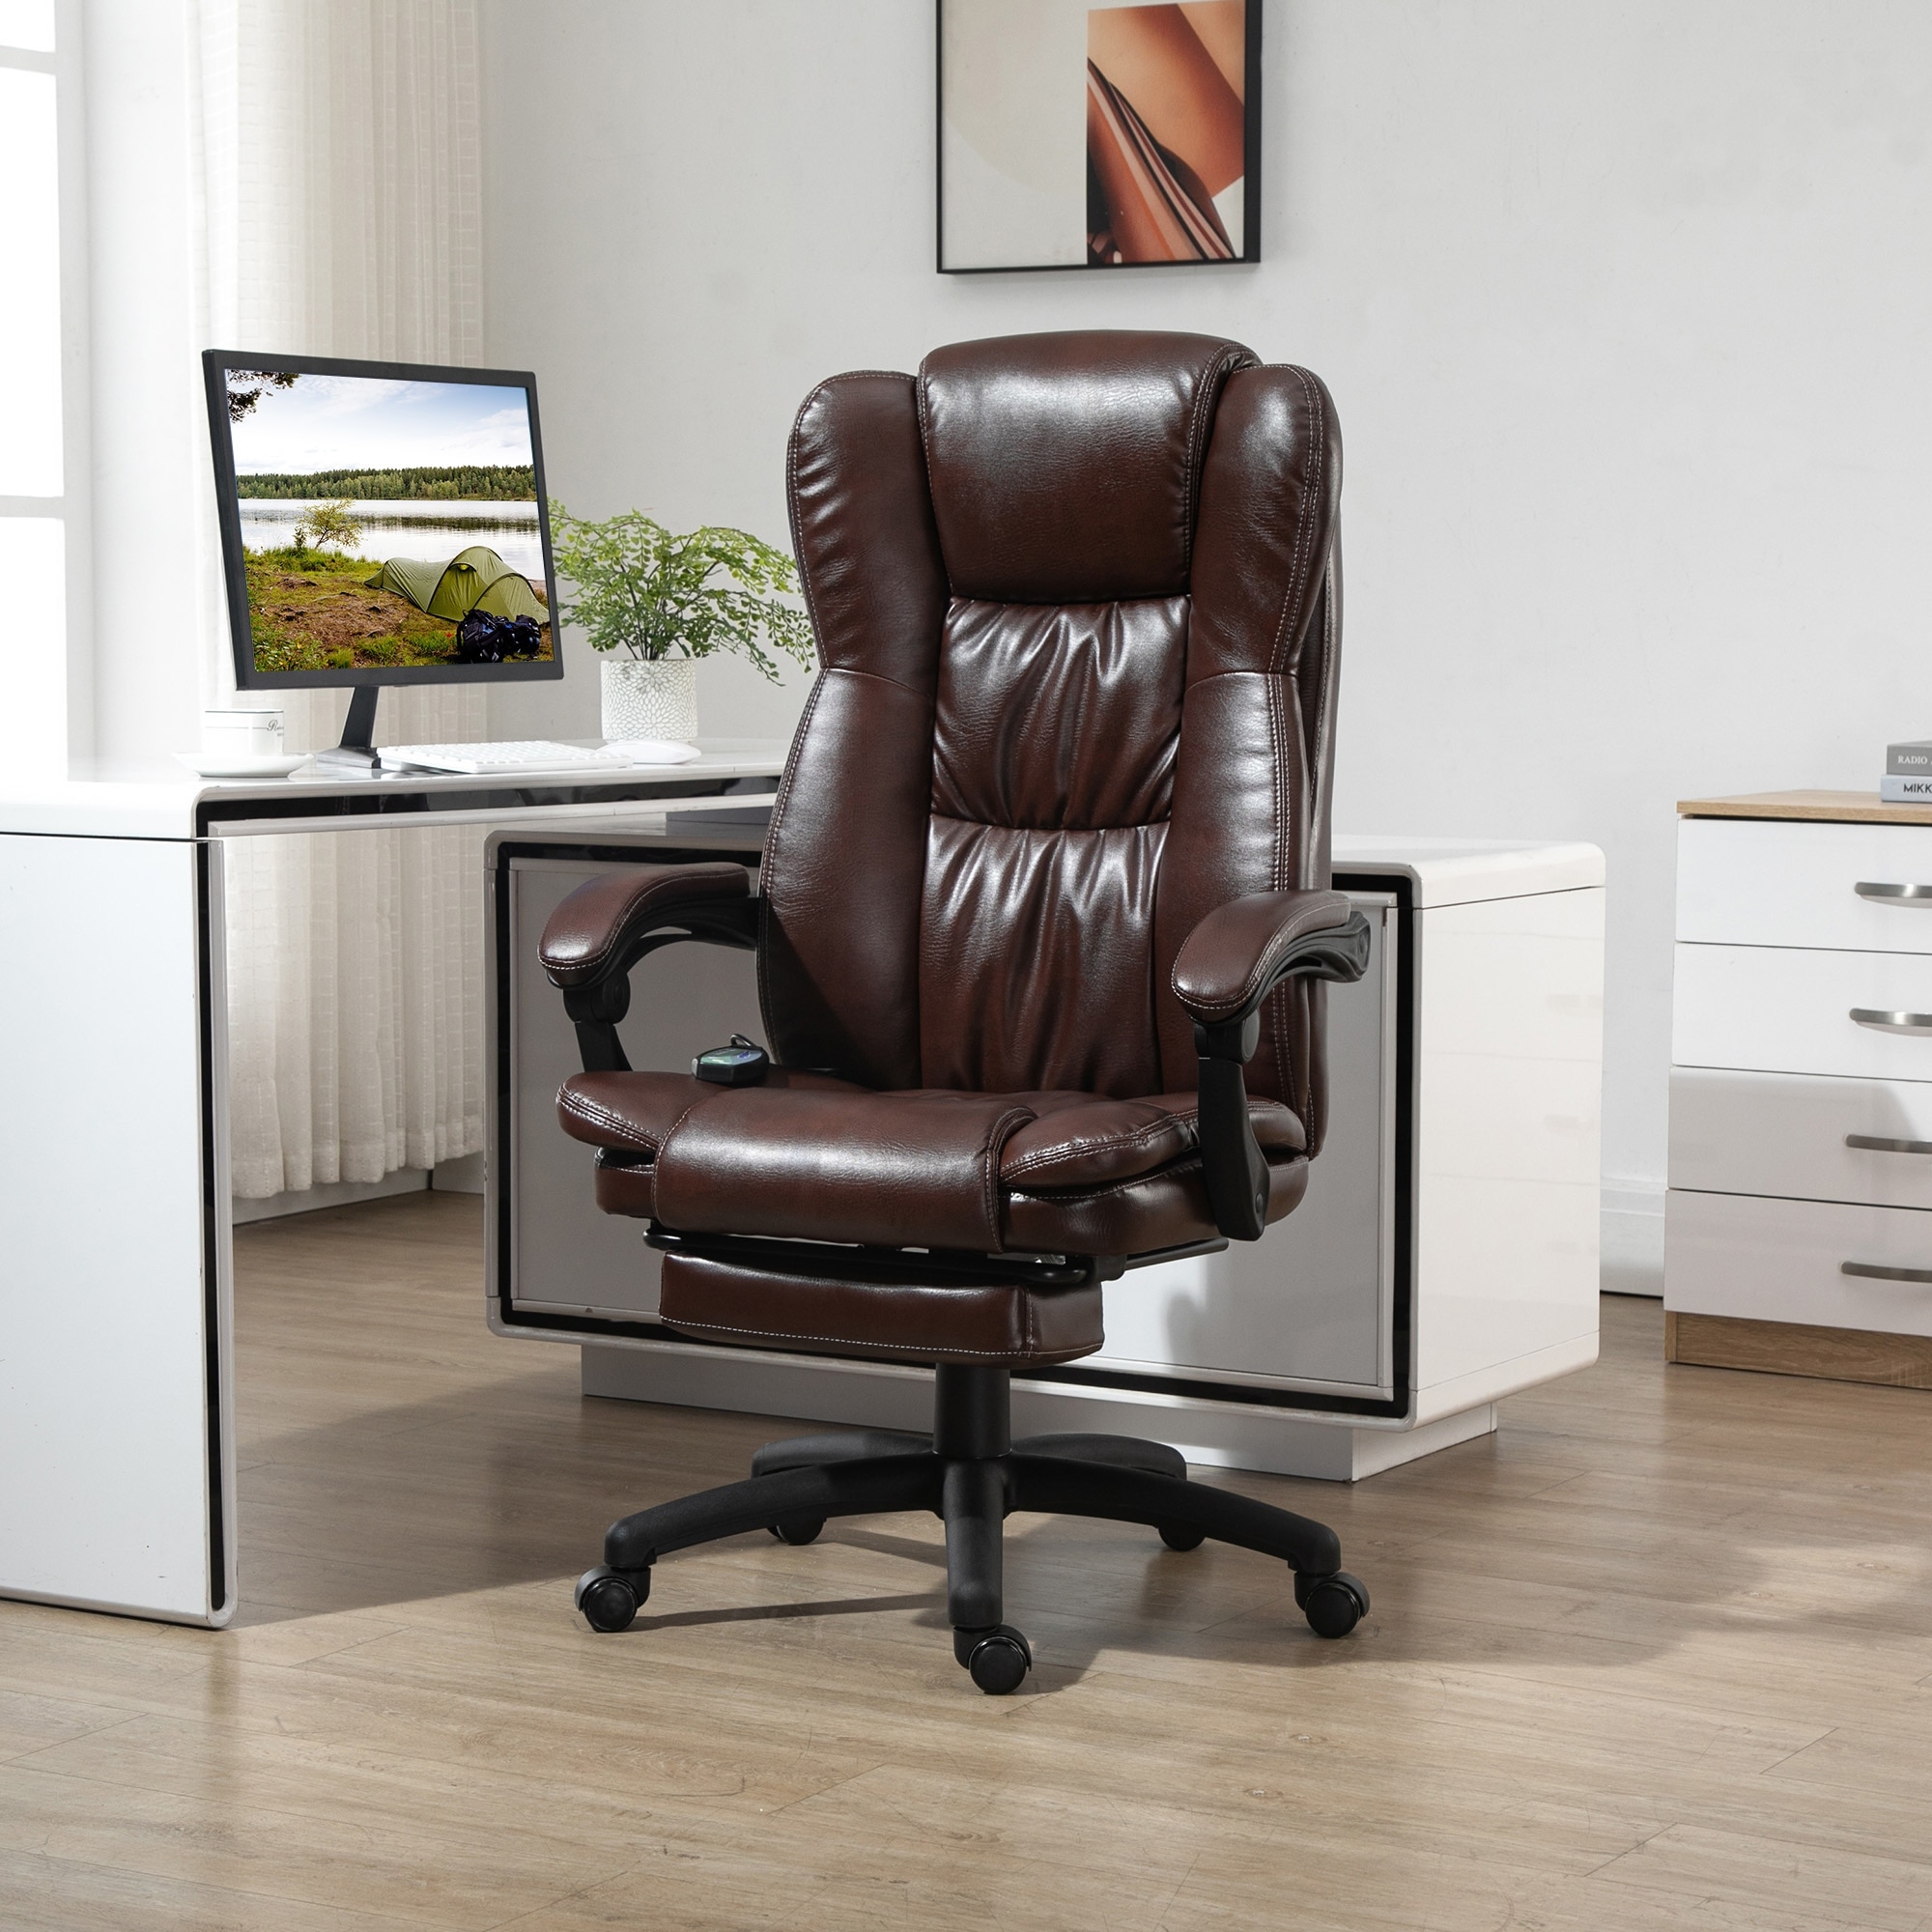 https://ak1.ostkcdn.com/images/products/is/images/direct/be29b136a43c6bafcb8a51b7d578b15c6f0338e2/Vinsetto-High-Back-Massage-Office-Chair%2C-Ergonomic-Executive-Chair%2C-PU-Leather-Swivel-Chair-with-6-Point-Vibration-Massage.jpg